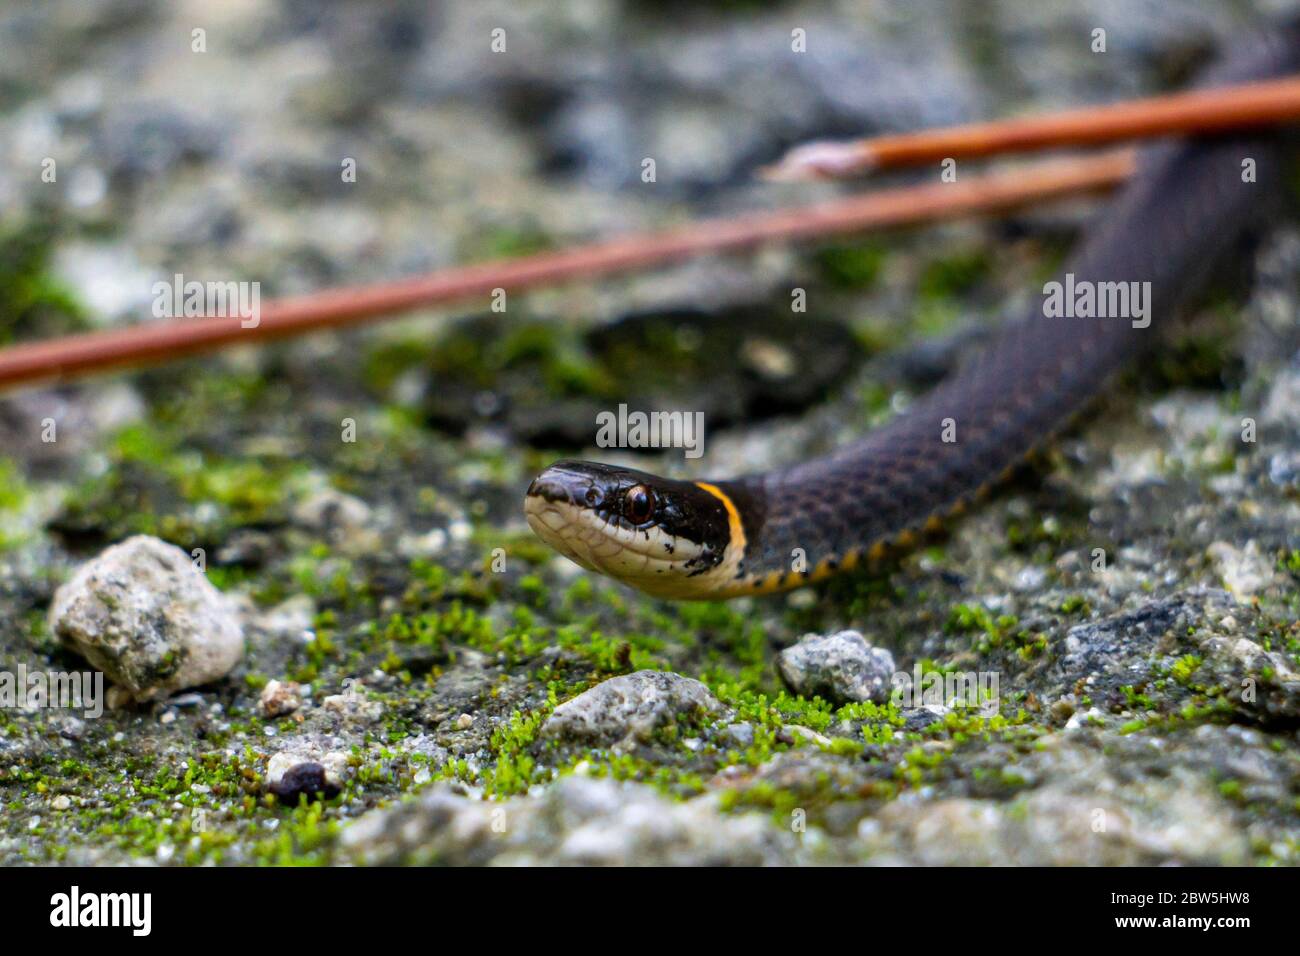 Closeup of a small Southern Ringneck Snake (Diadophis punctatus ssp. punctatus) on a trail in Palm Beach County, Florida, USA Stock Photo